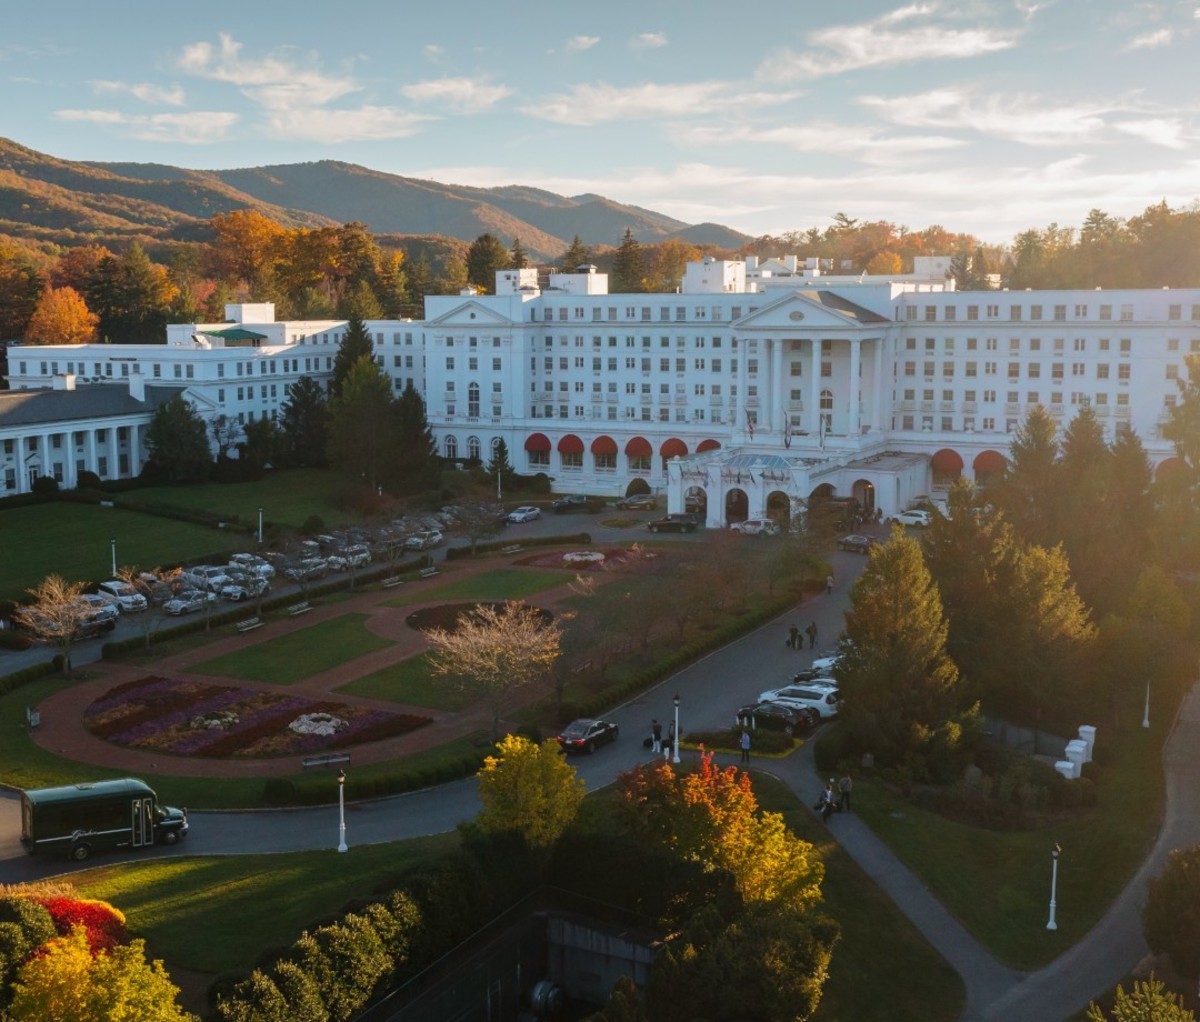 The Greenbrier.